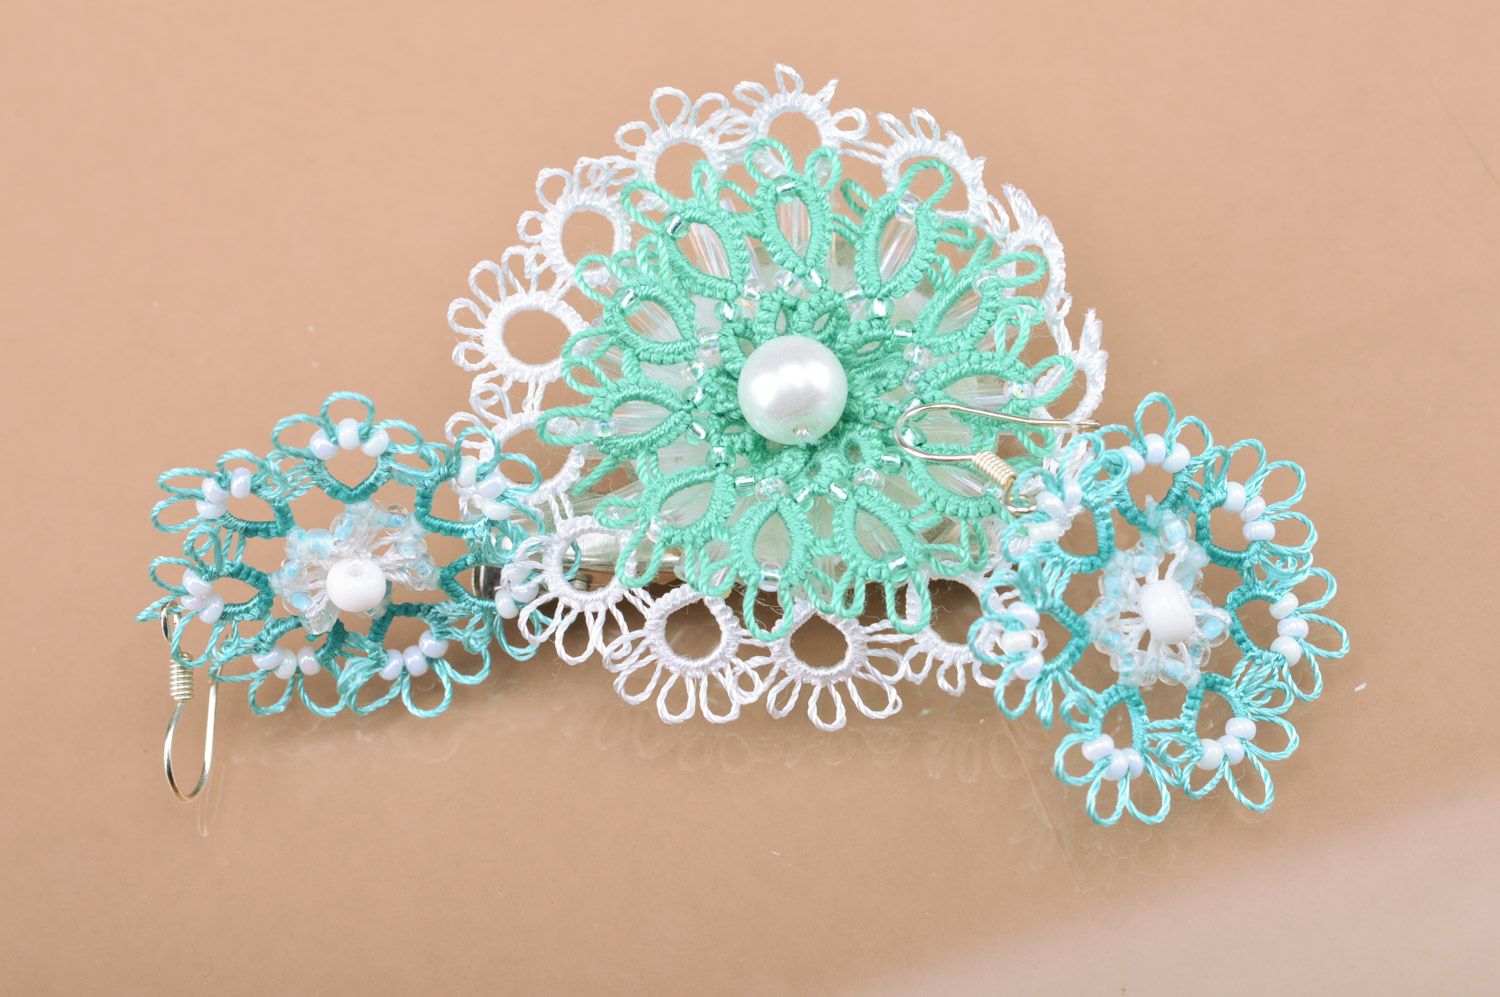 Handmade tatting woven jewelry set 2 items turquoise earrings and brooch hair clip photo 2